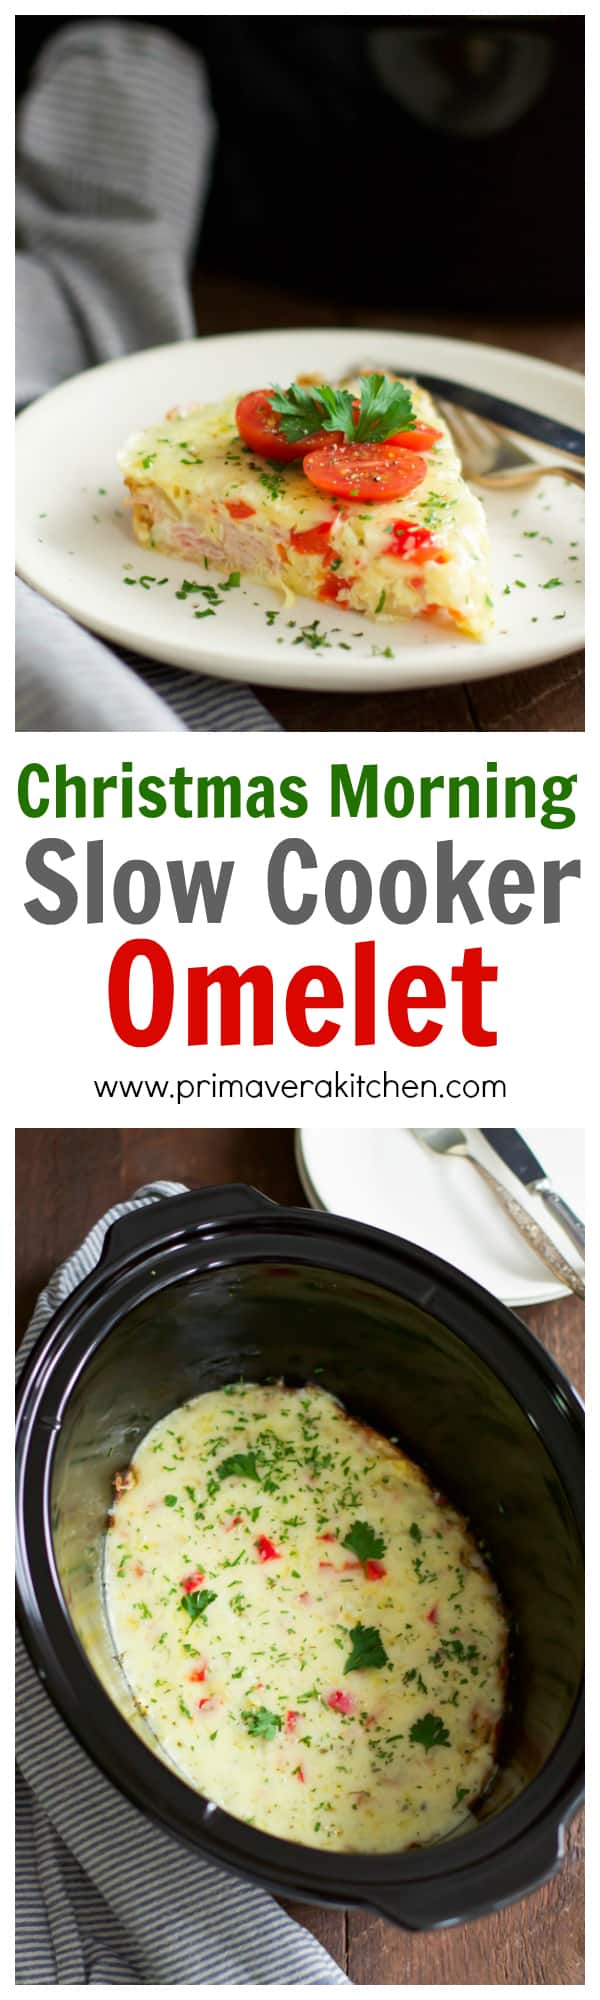 chistmas-morning-slow-cooker-omelet_- This Christmas Morning Slow Cooker Omelet is perfect for you who don’t want to spend your fun Christmas morning in the kitchen. You can make this omelet ahead with eggs, almond milk, bell pepper, onions, ham and cheese